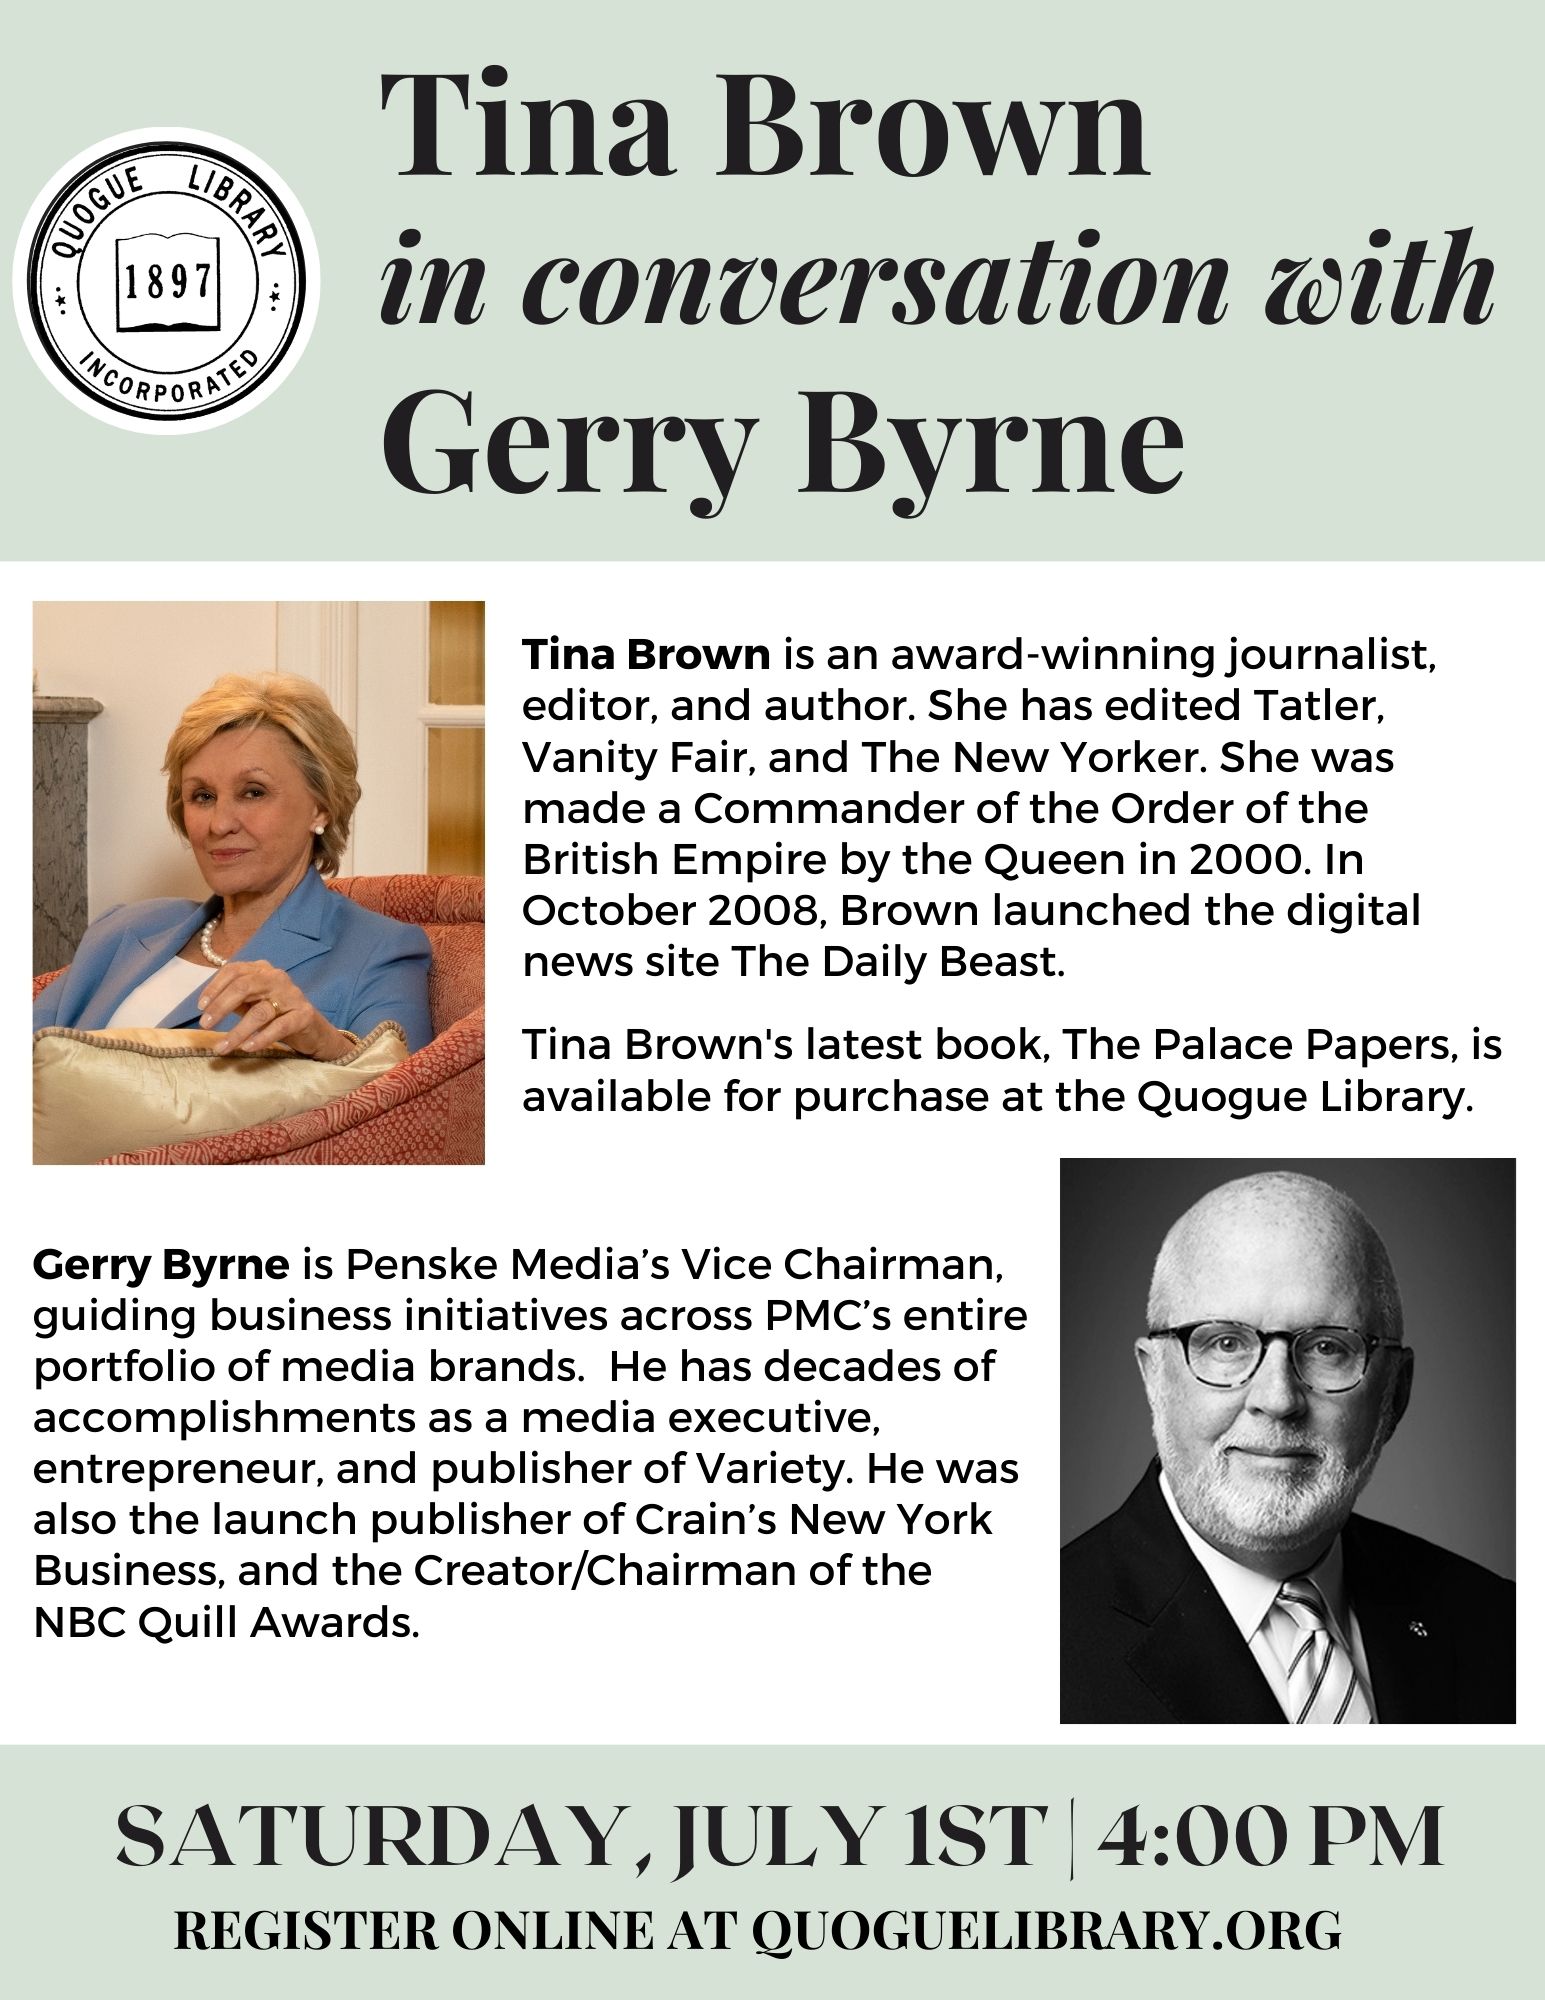 Tina Brown in conversation with Gerry Byrne